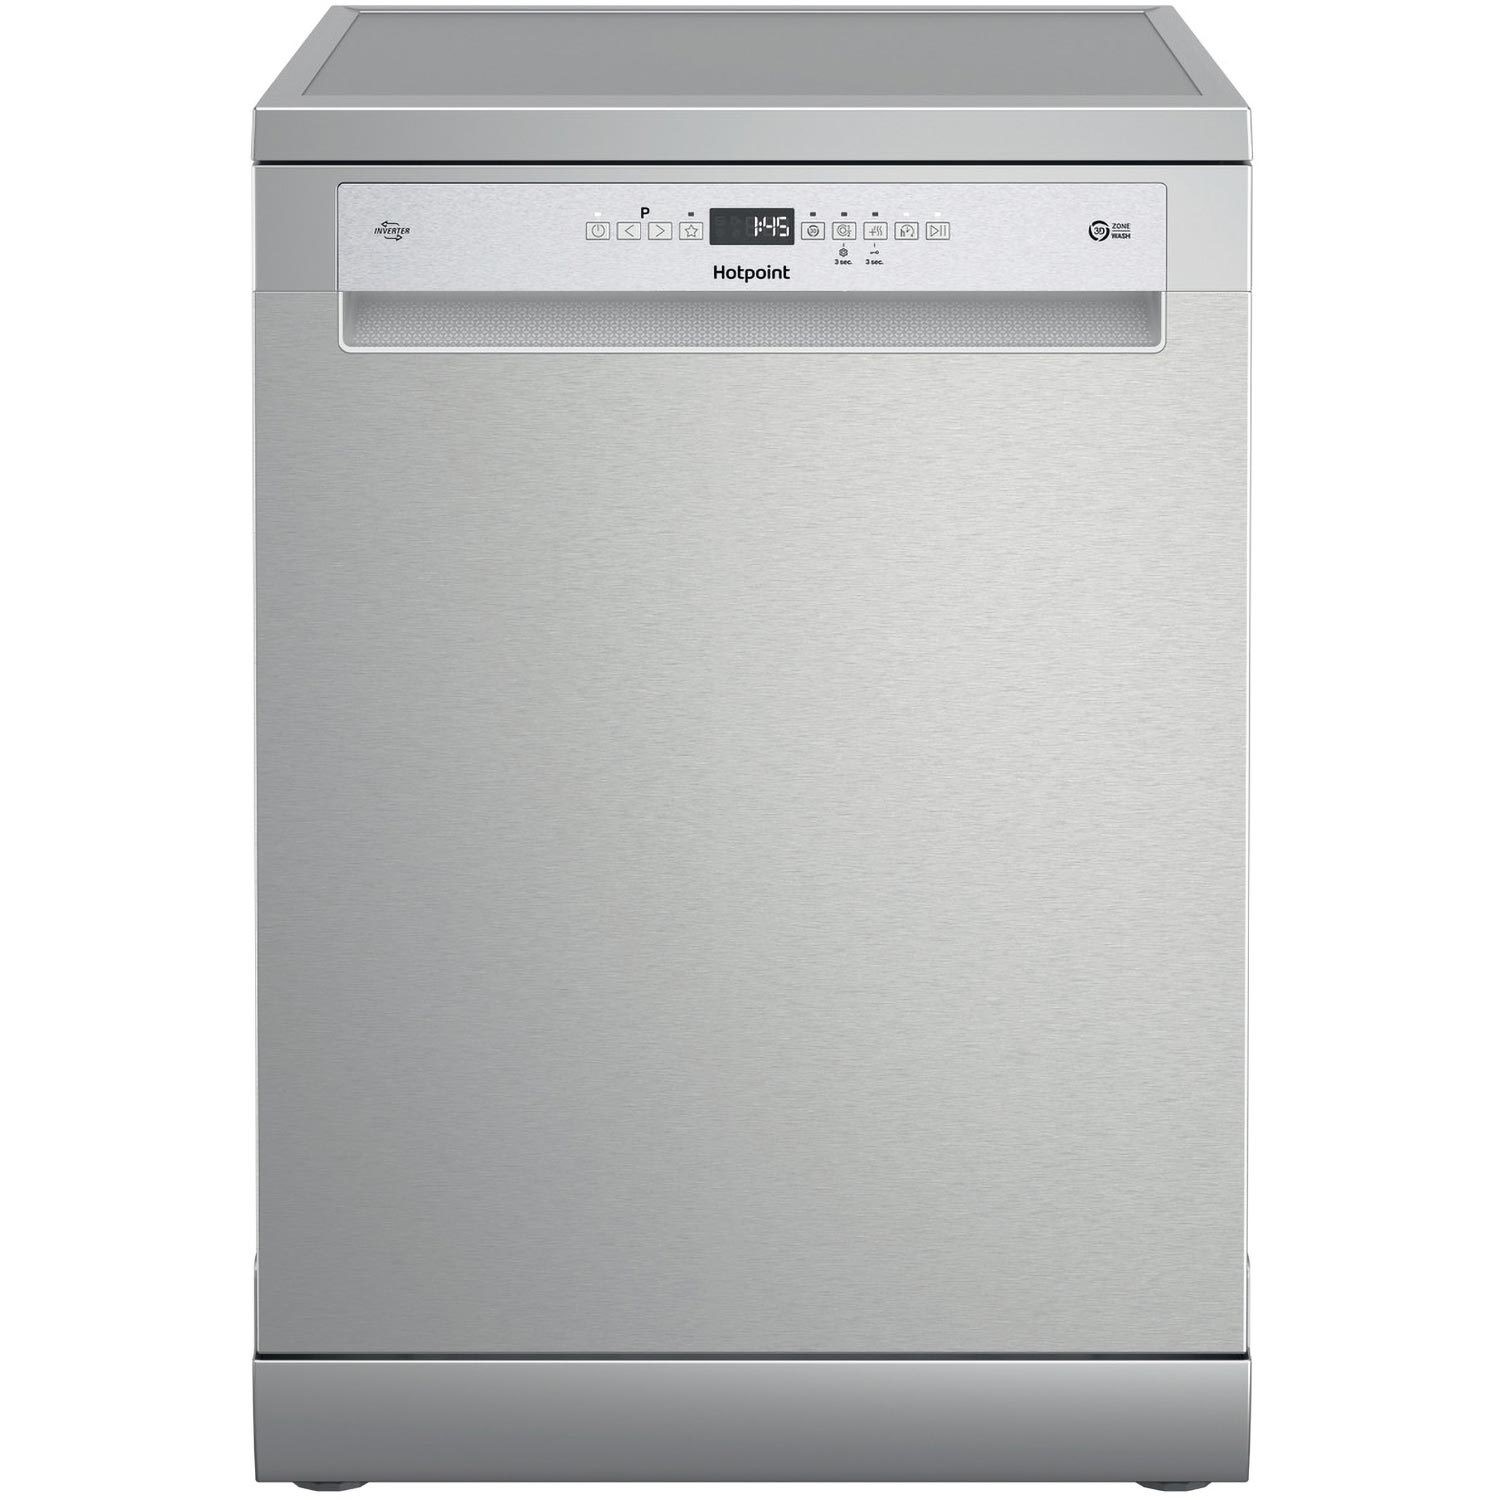 Photos - Dishwasher Hotpoint-Ariston HOTPOINT Maxi Space 15 Place Settings Freestanding  - Silver H7F 